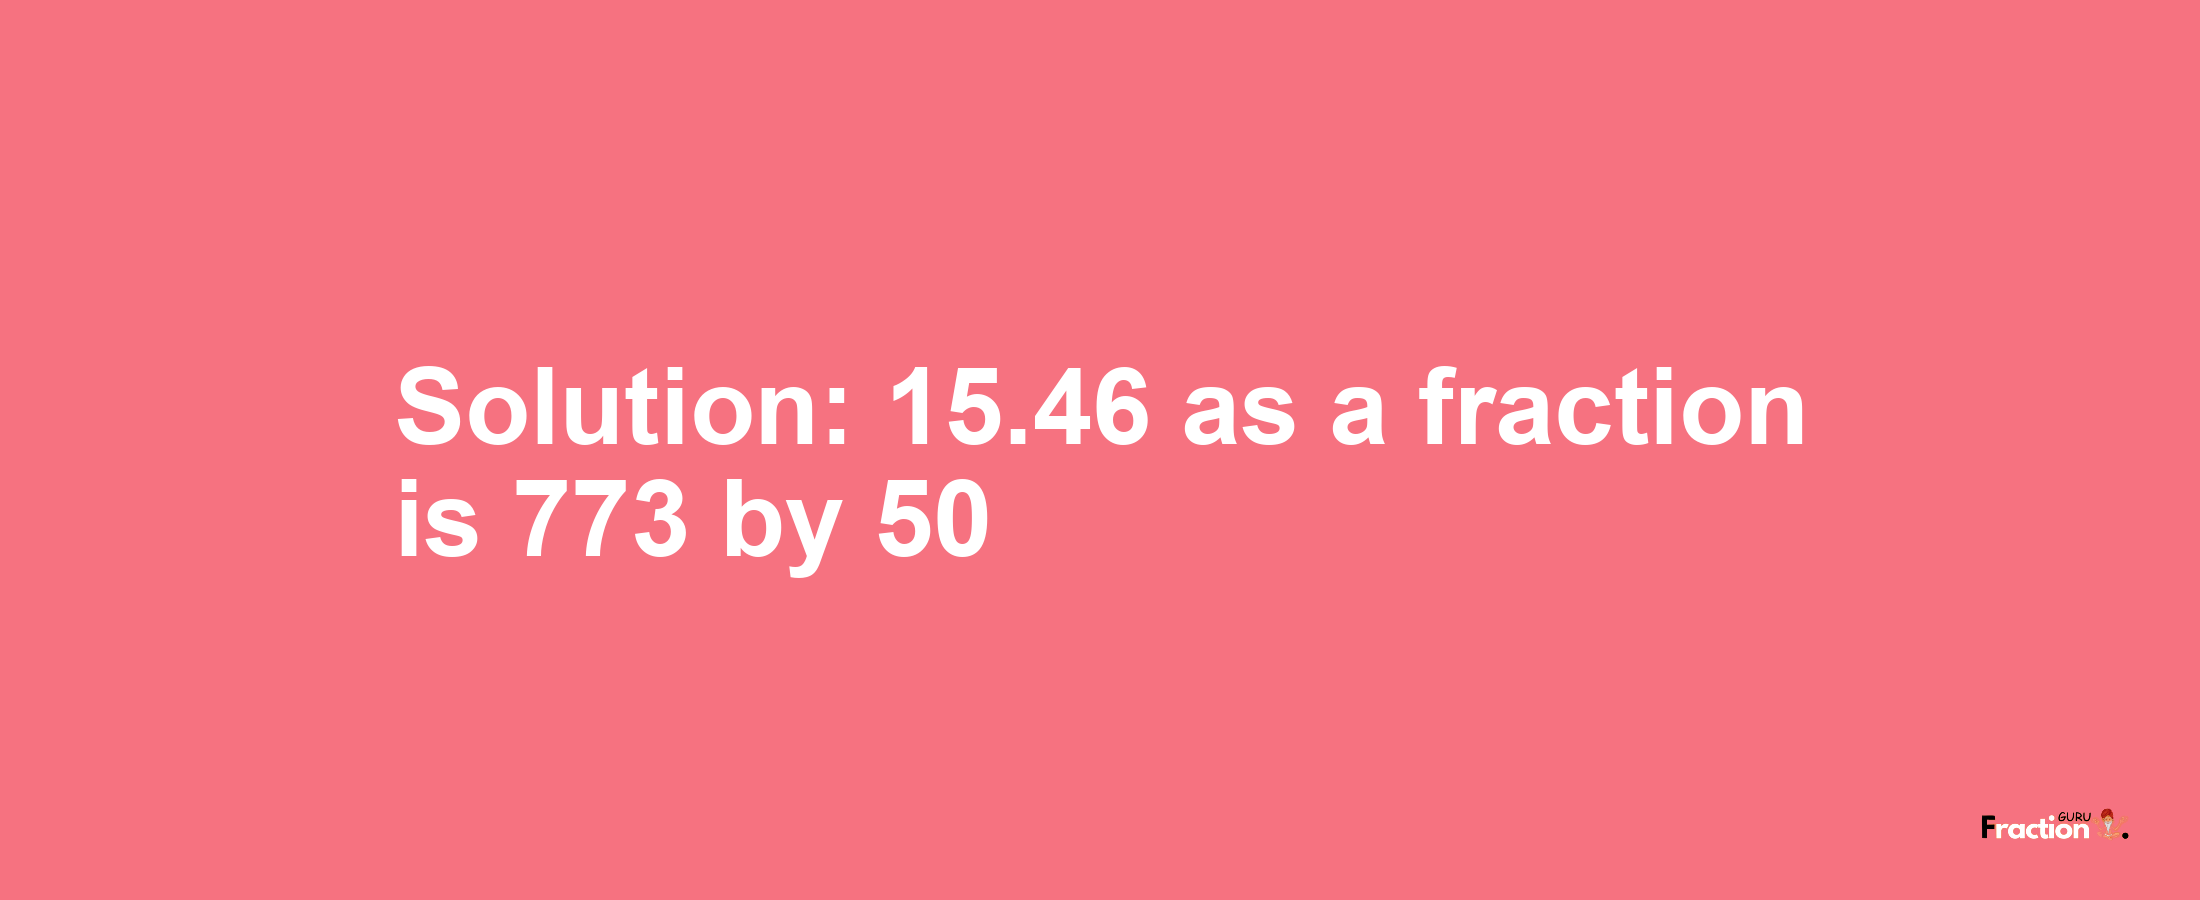 Solution:15.46 as a fraction is 773/50